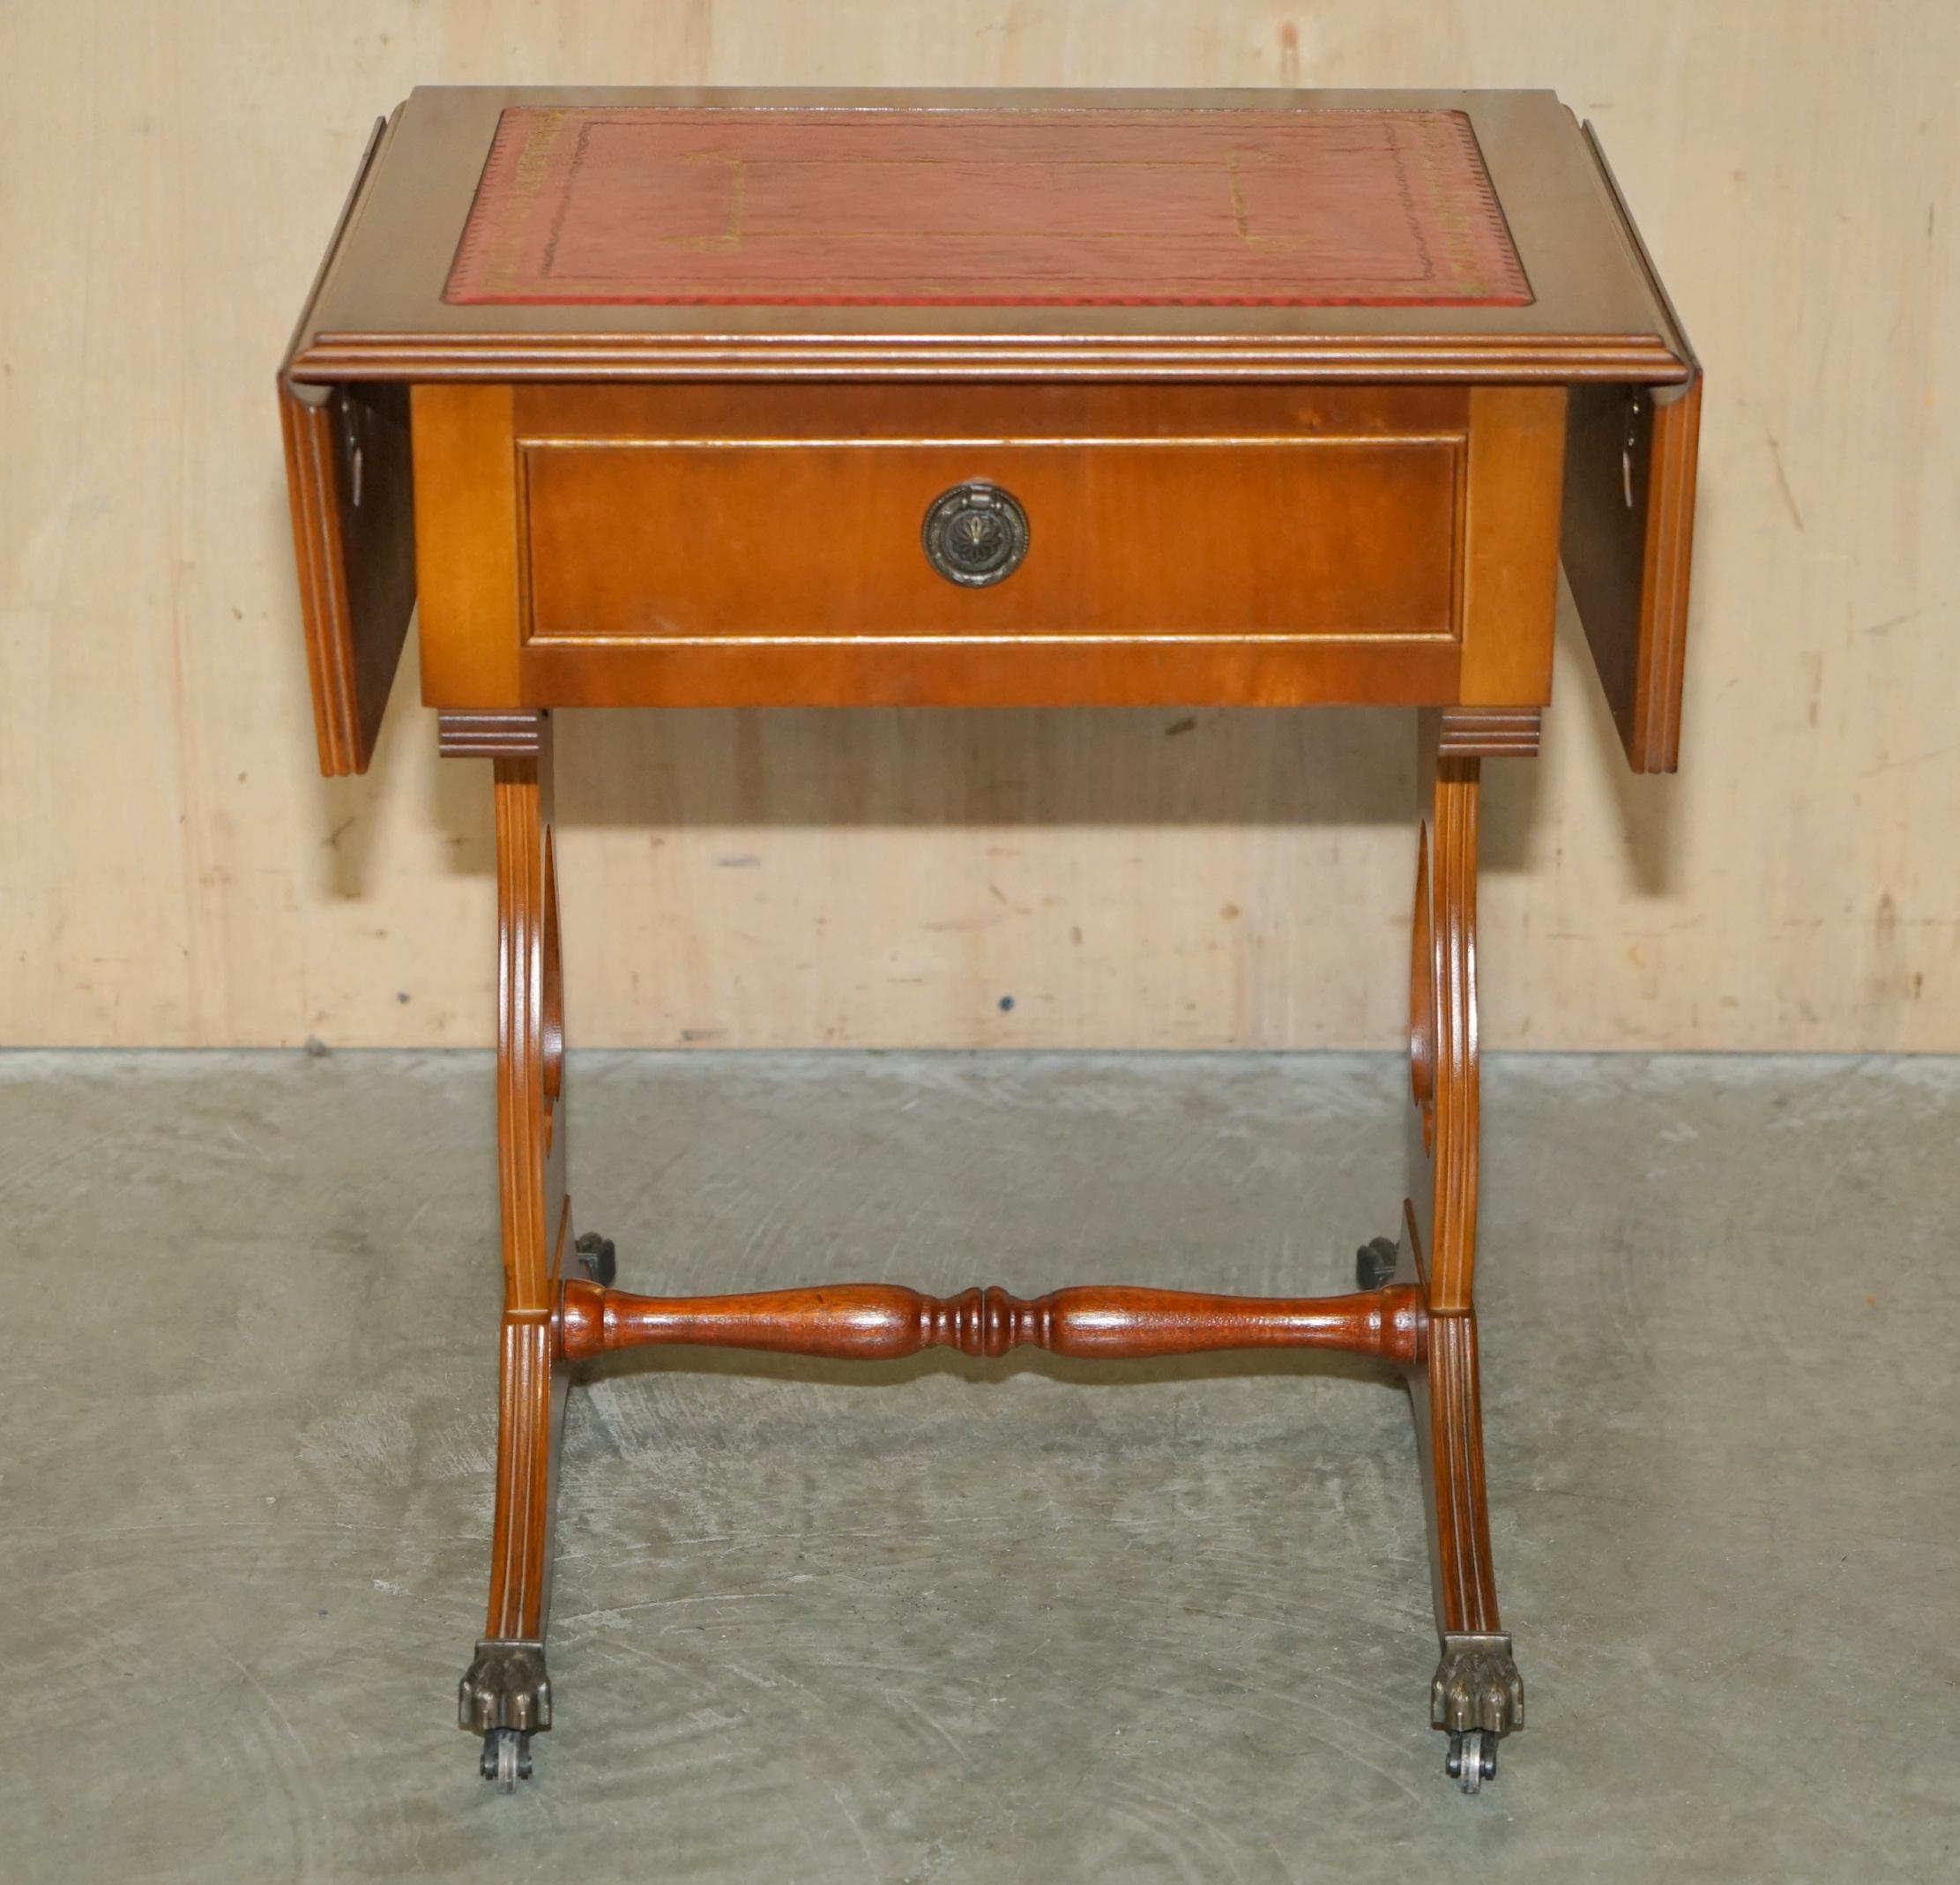 LOVELY ViNTAGE OXBLOOD LEATHER EXTENDING SIDE TABLE WITH GOLD LEAF INLAY For Sale 6